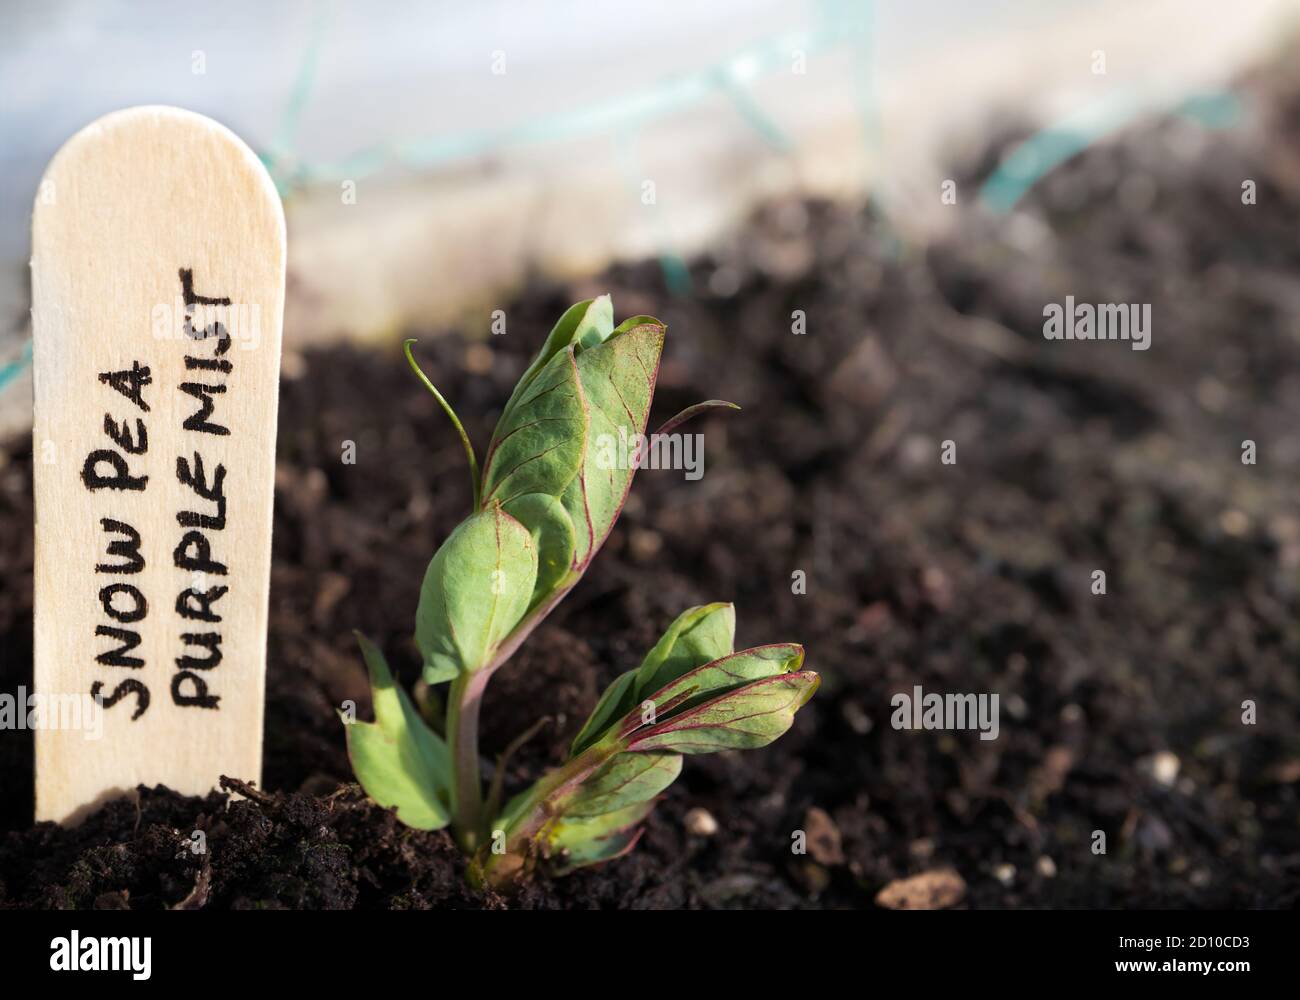 Snow Pea plant seedling. Close up of heirloom pea seed 'Purple Mist'. Leaves are green with purple detail. Stock Photo